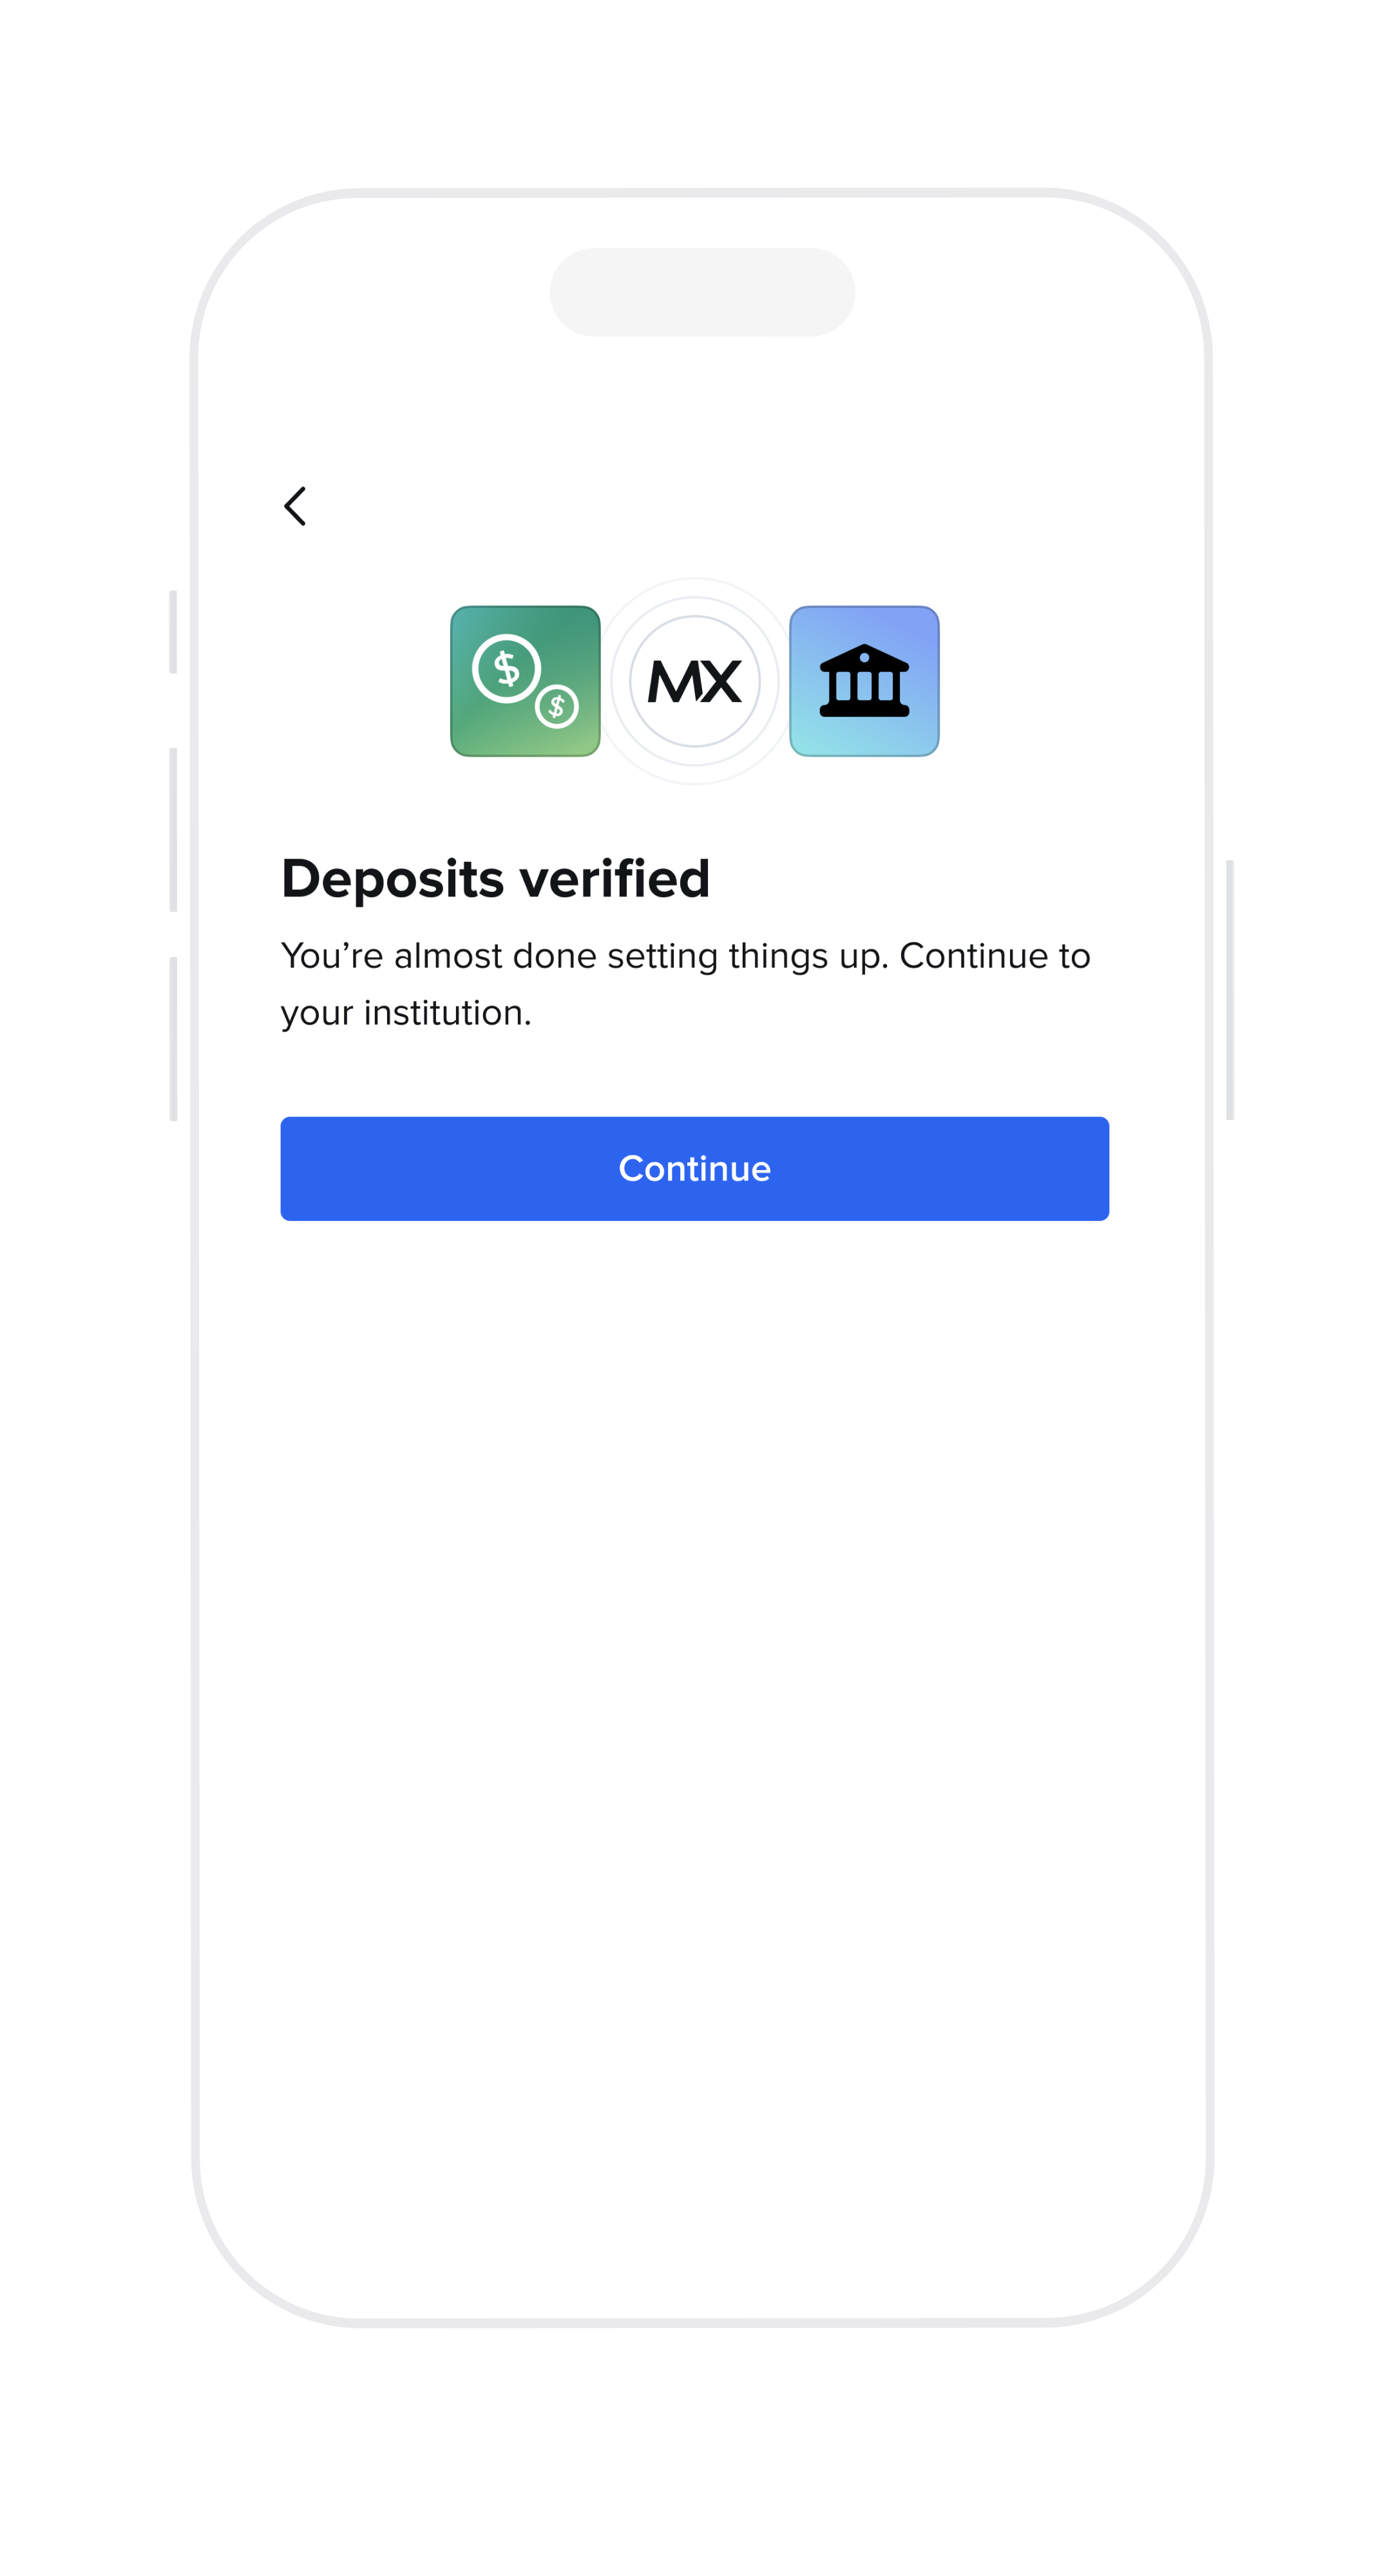 Rendering of the successful deposit verification for a mobile device.